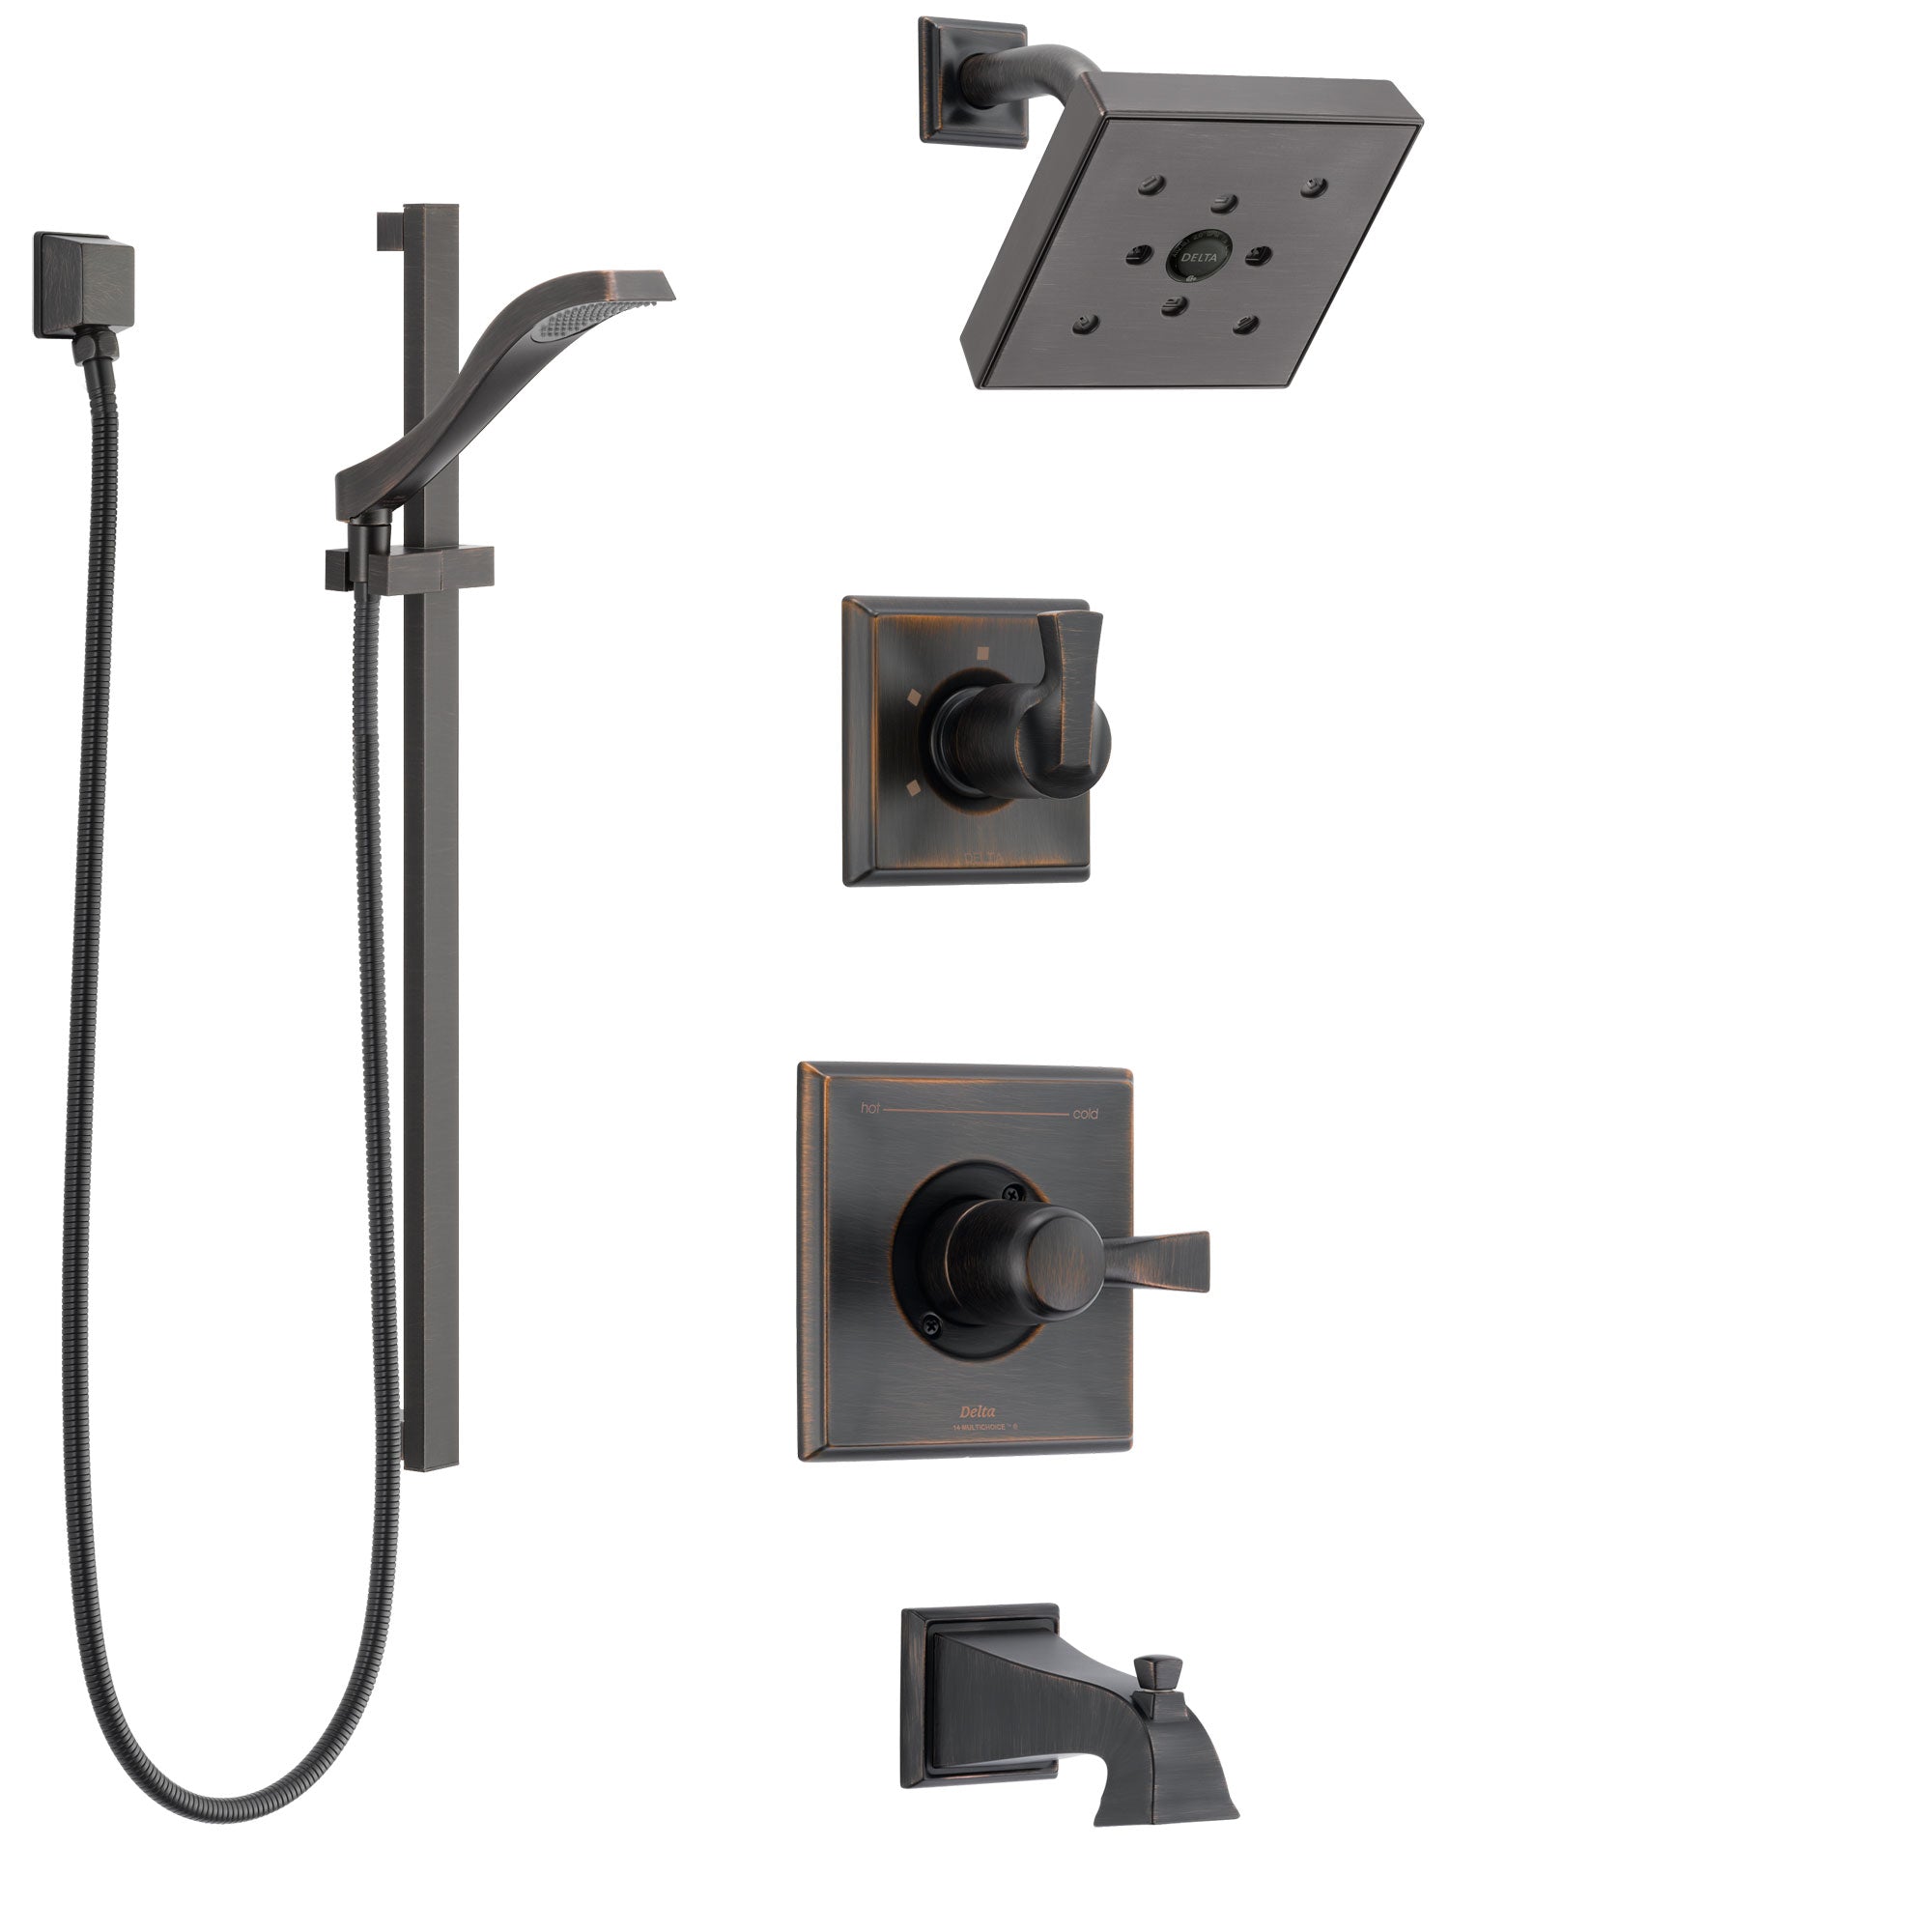 Delta Dryden Venetian Bronze Tub and Shower System with Control Handle, 3-Setting Diverter, Showerhead, and Hand Shower with Slidebar SS144512RB4